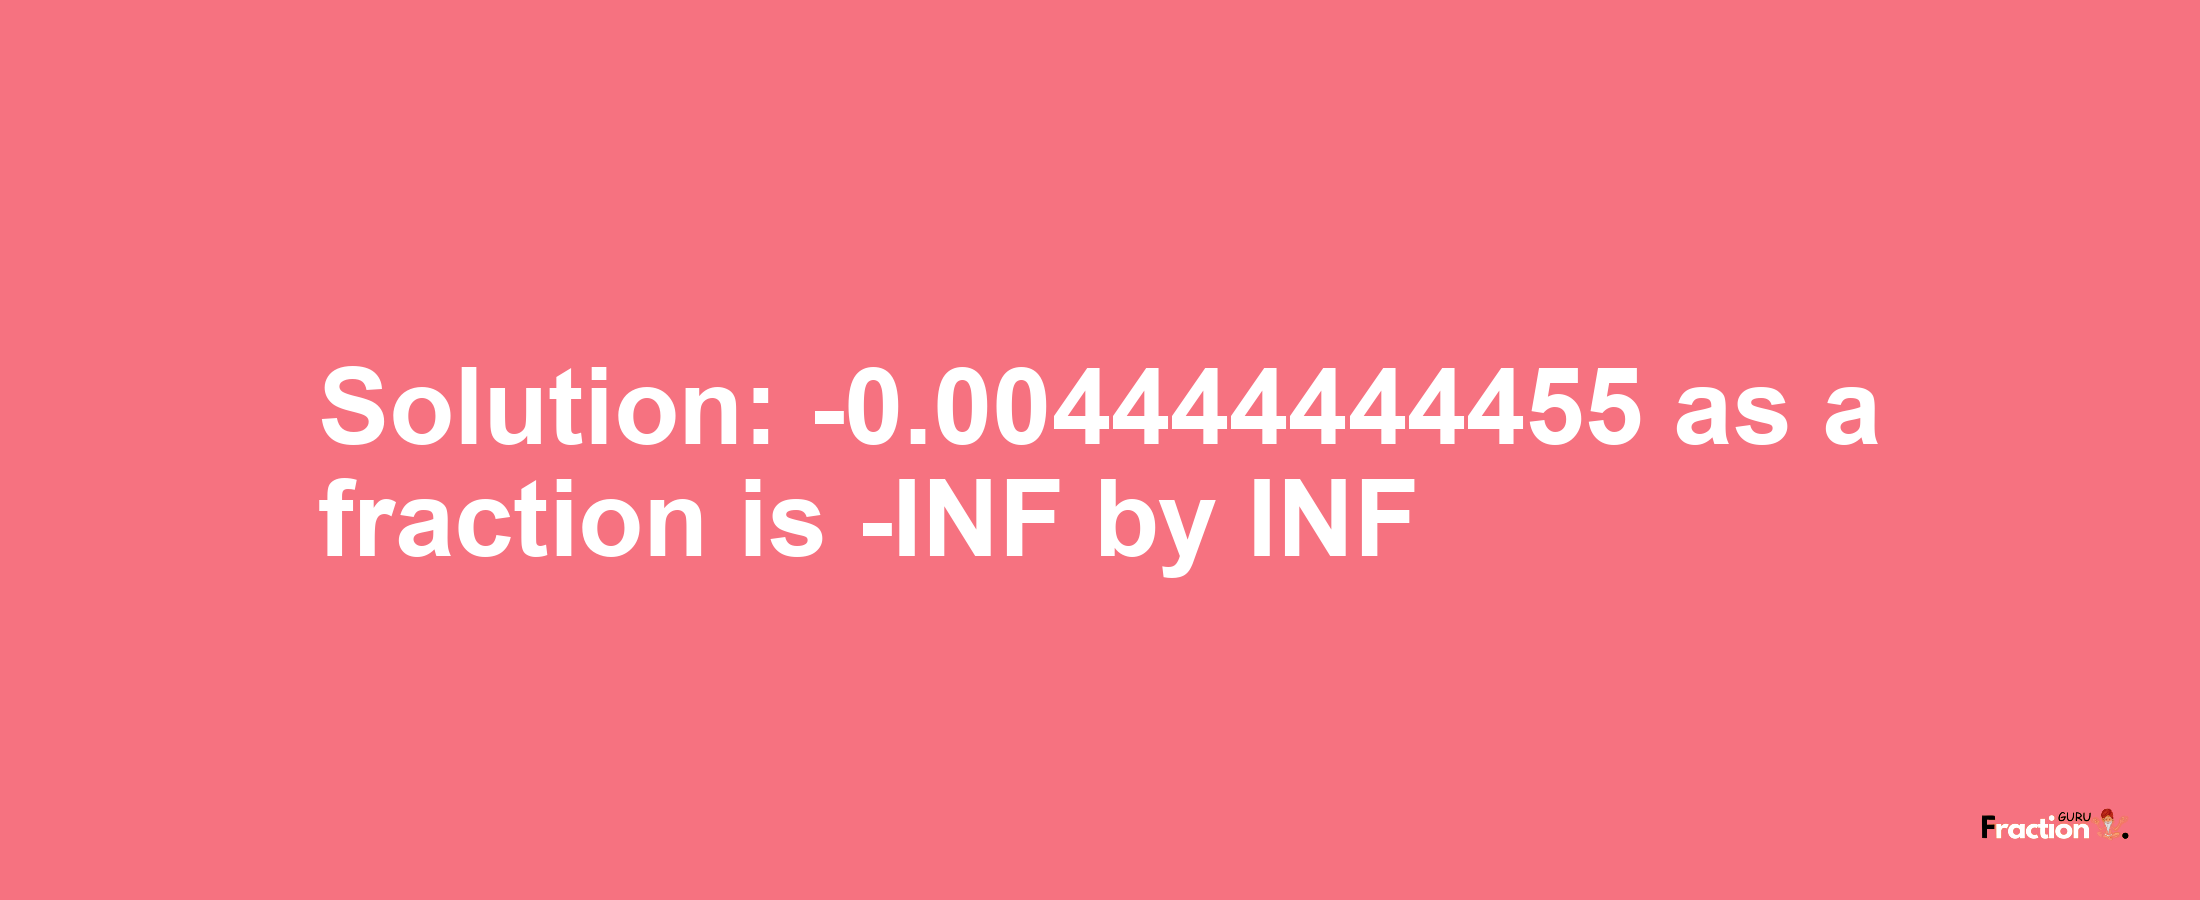 Solution:-0.004444444455 as a fraction is -INF/INF